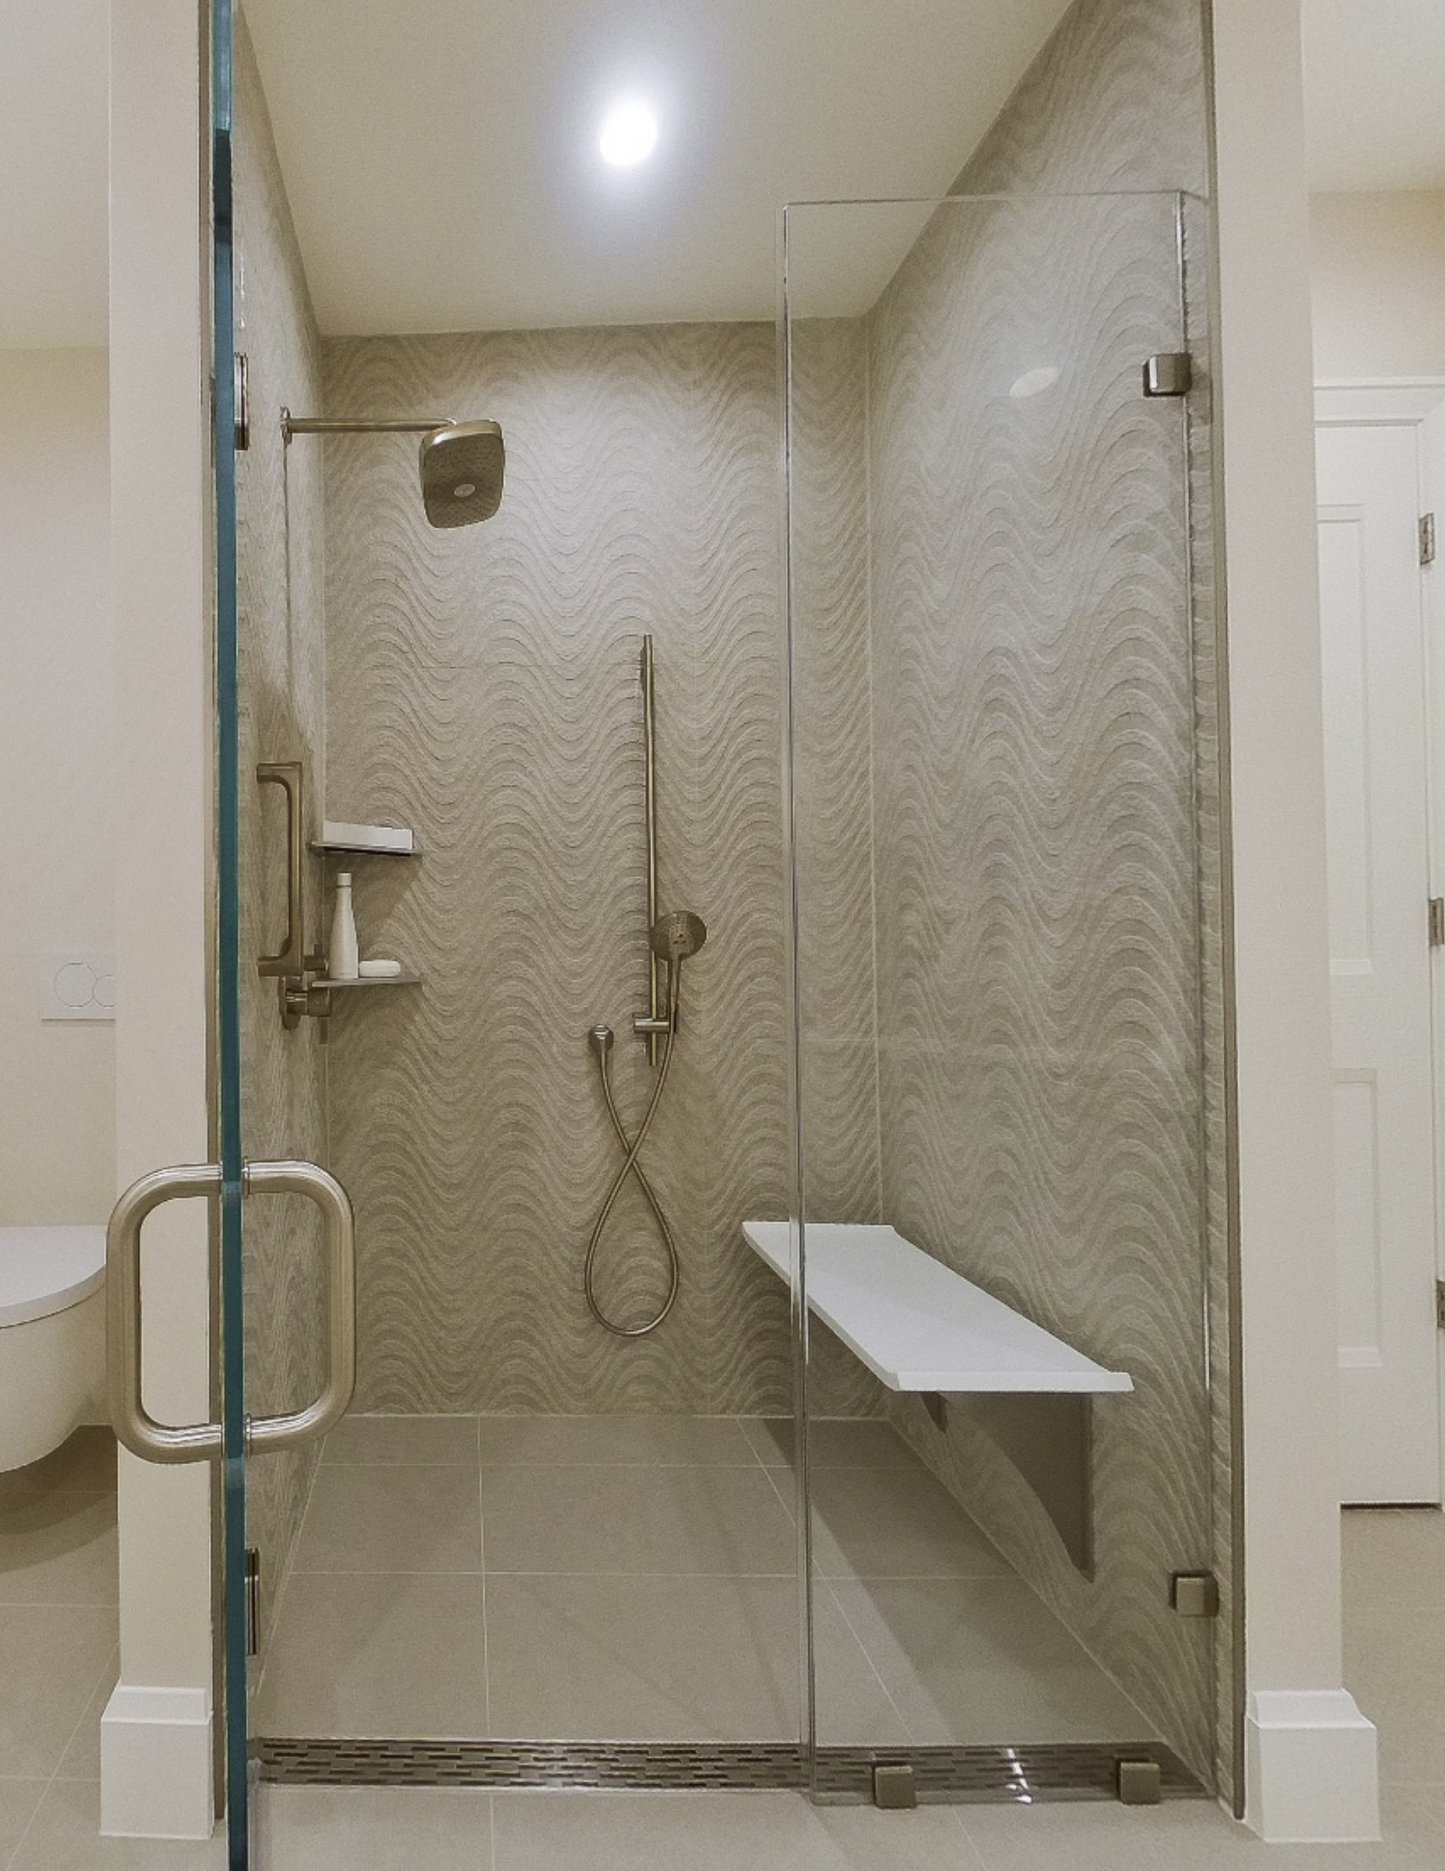 The Lotus Wellness Shower Experience